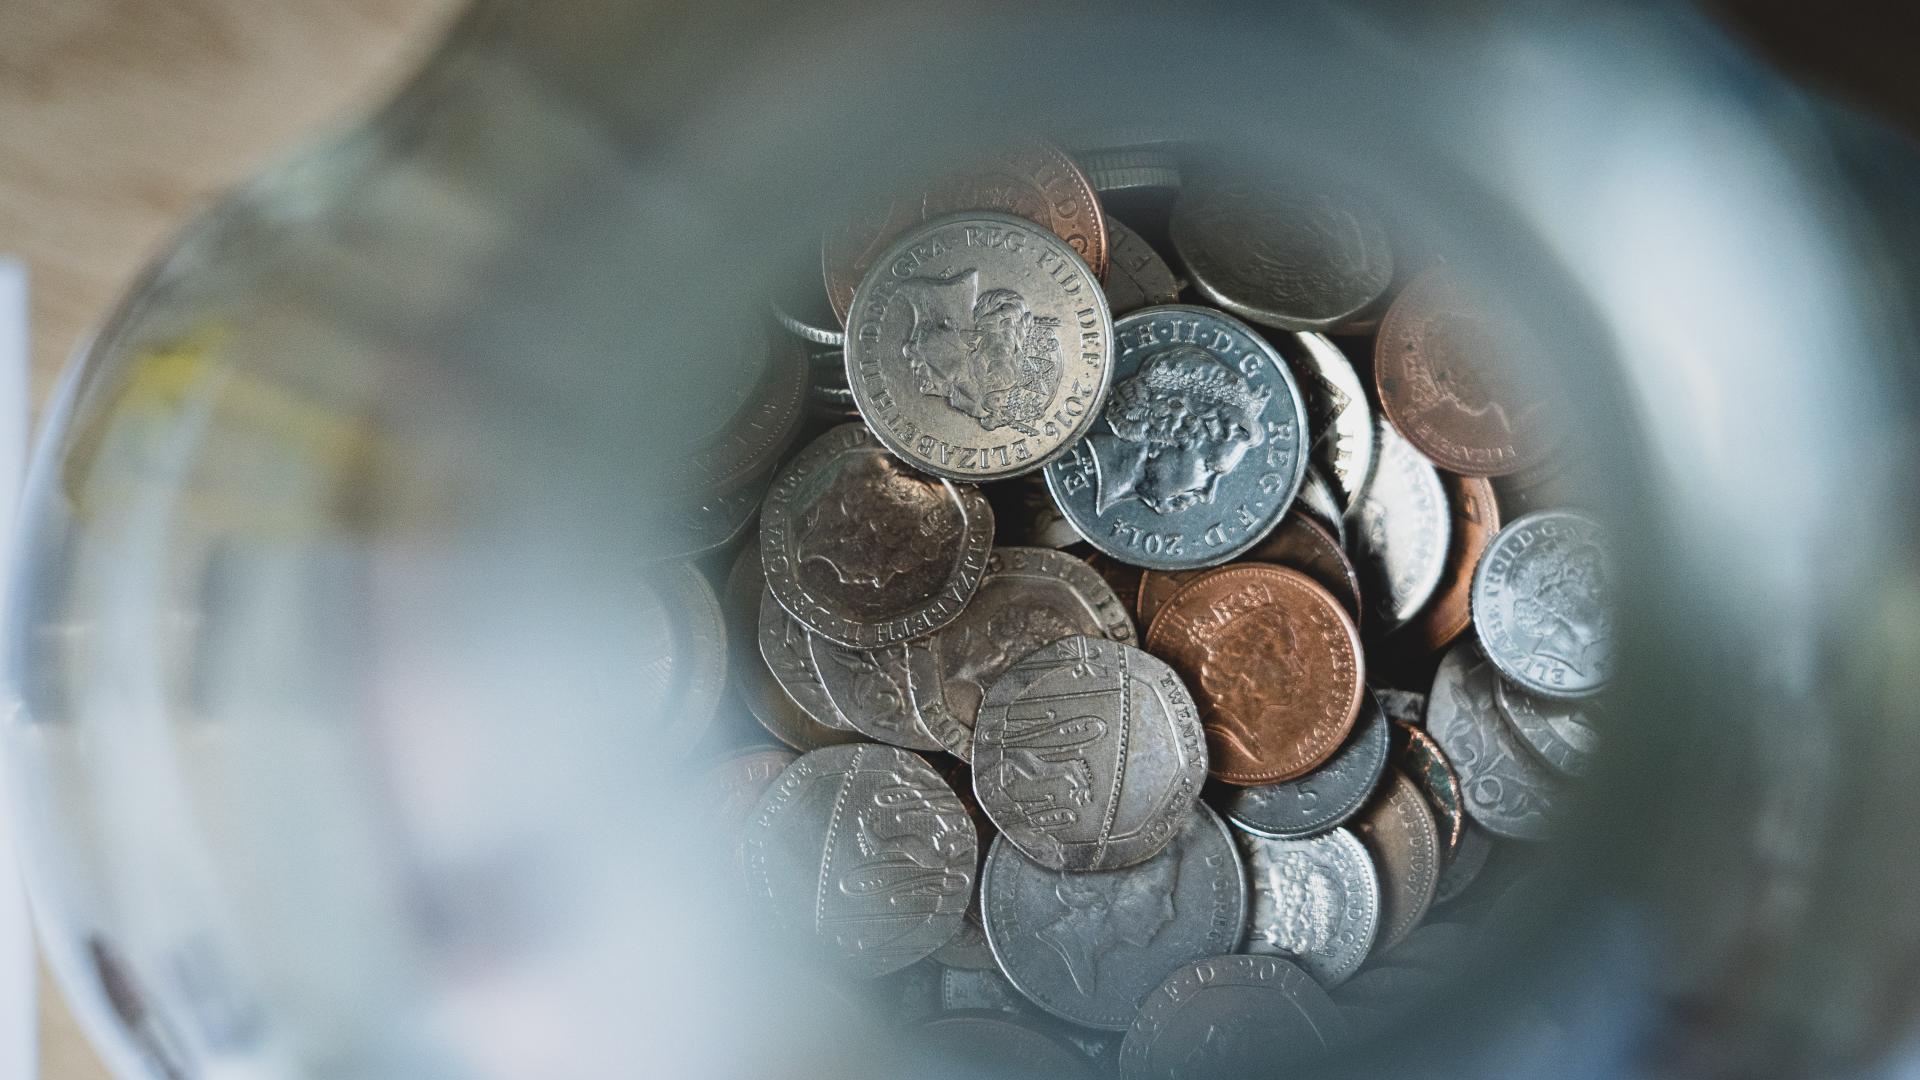 View from the top of a jar filled with UK currency coins